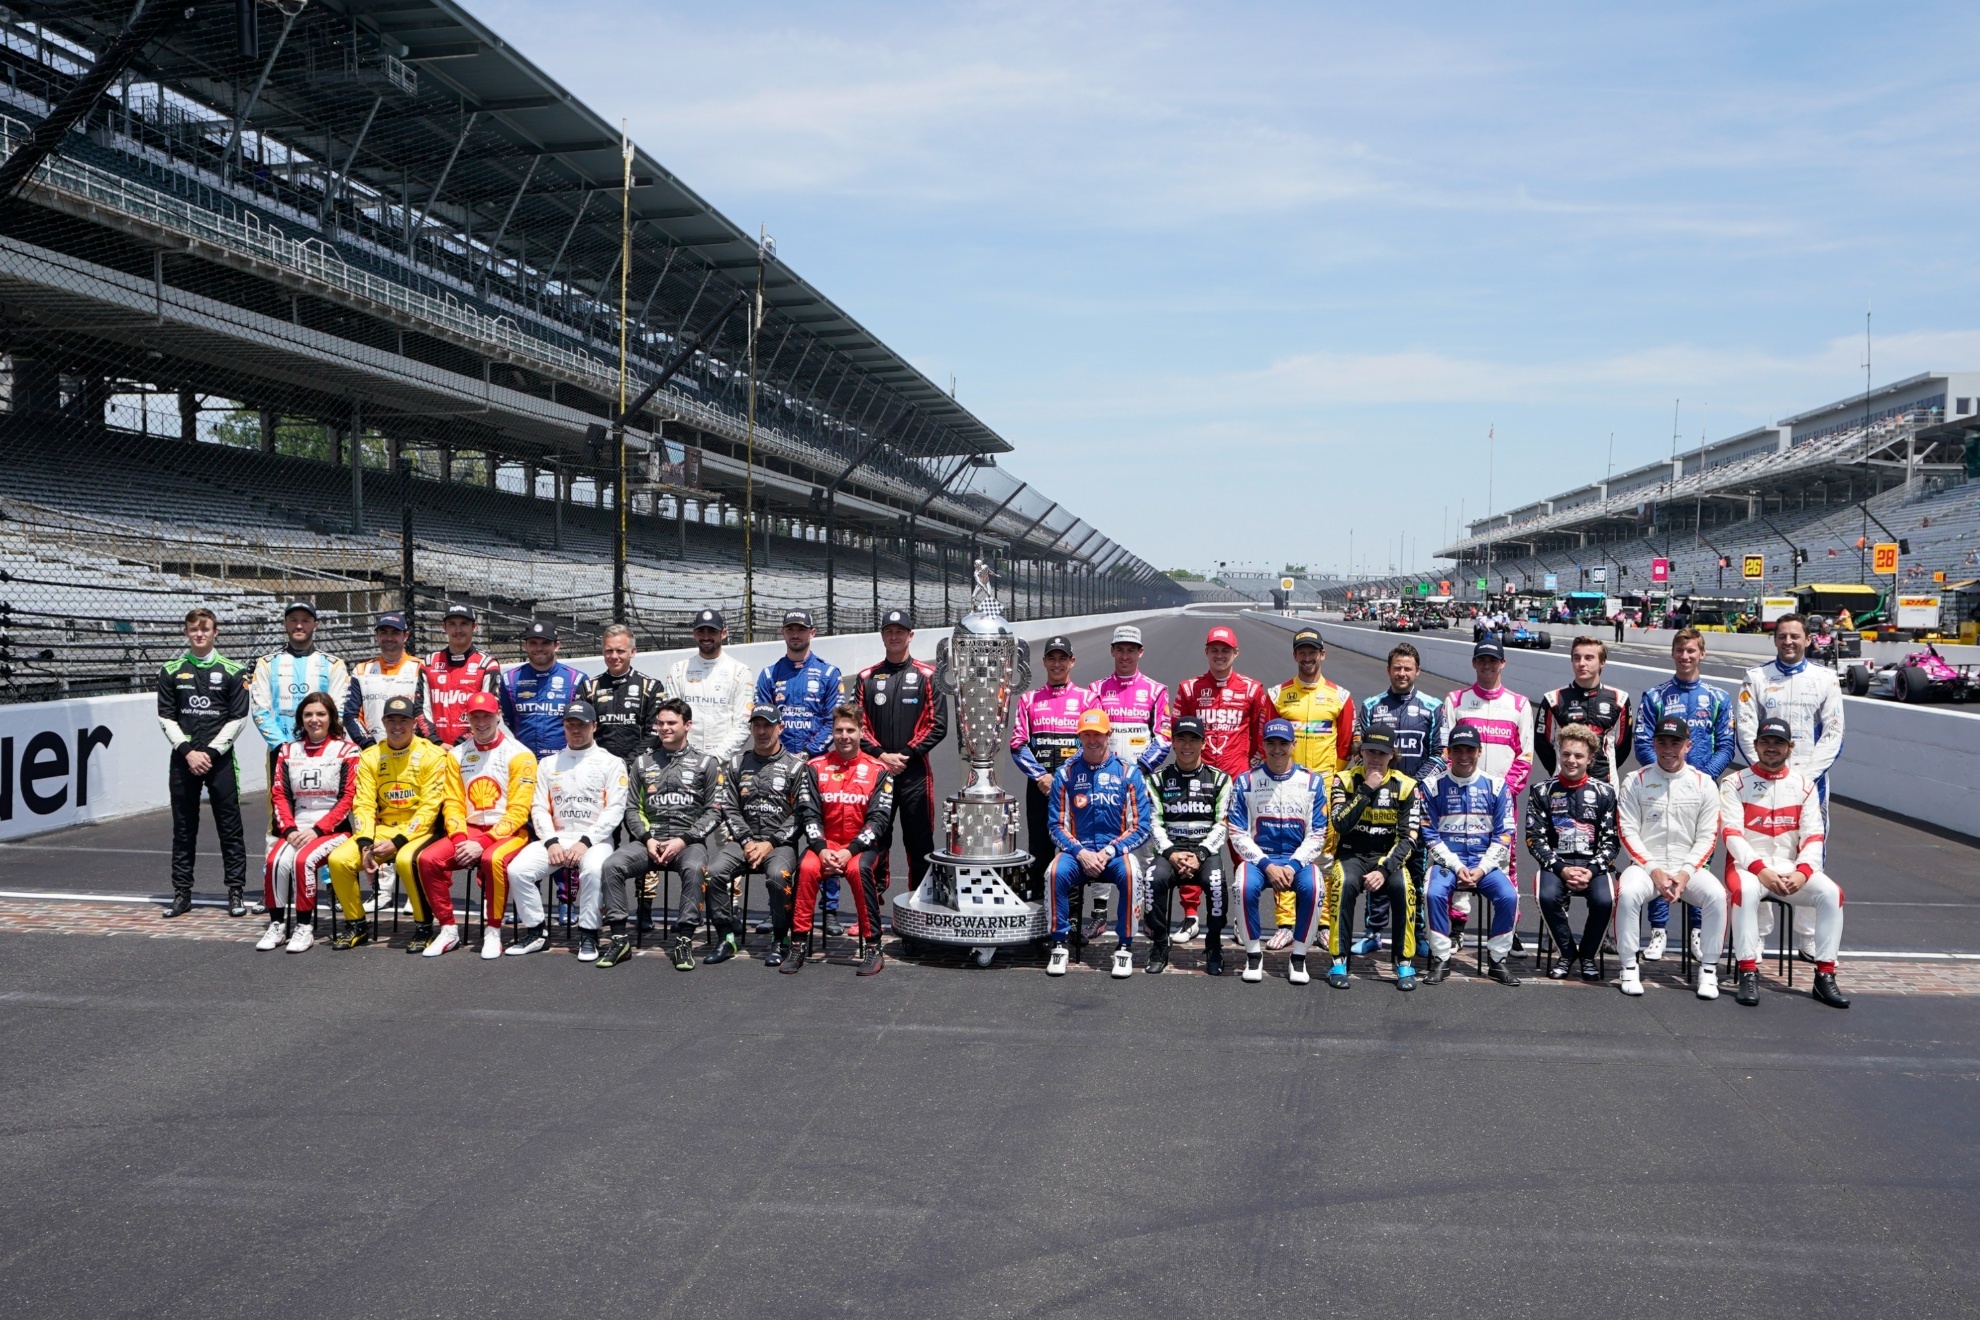 Teams and pilots are ready for the Indy 500 race this weekend.